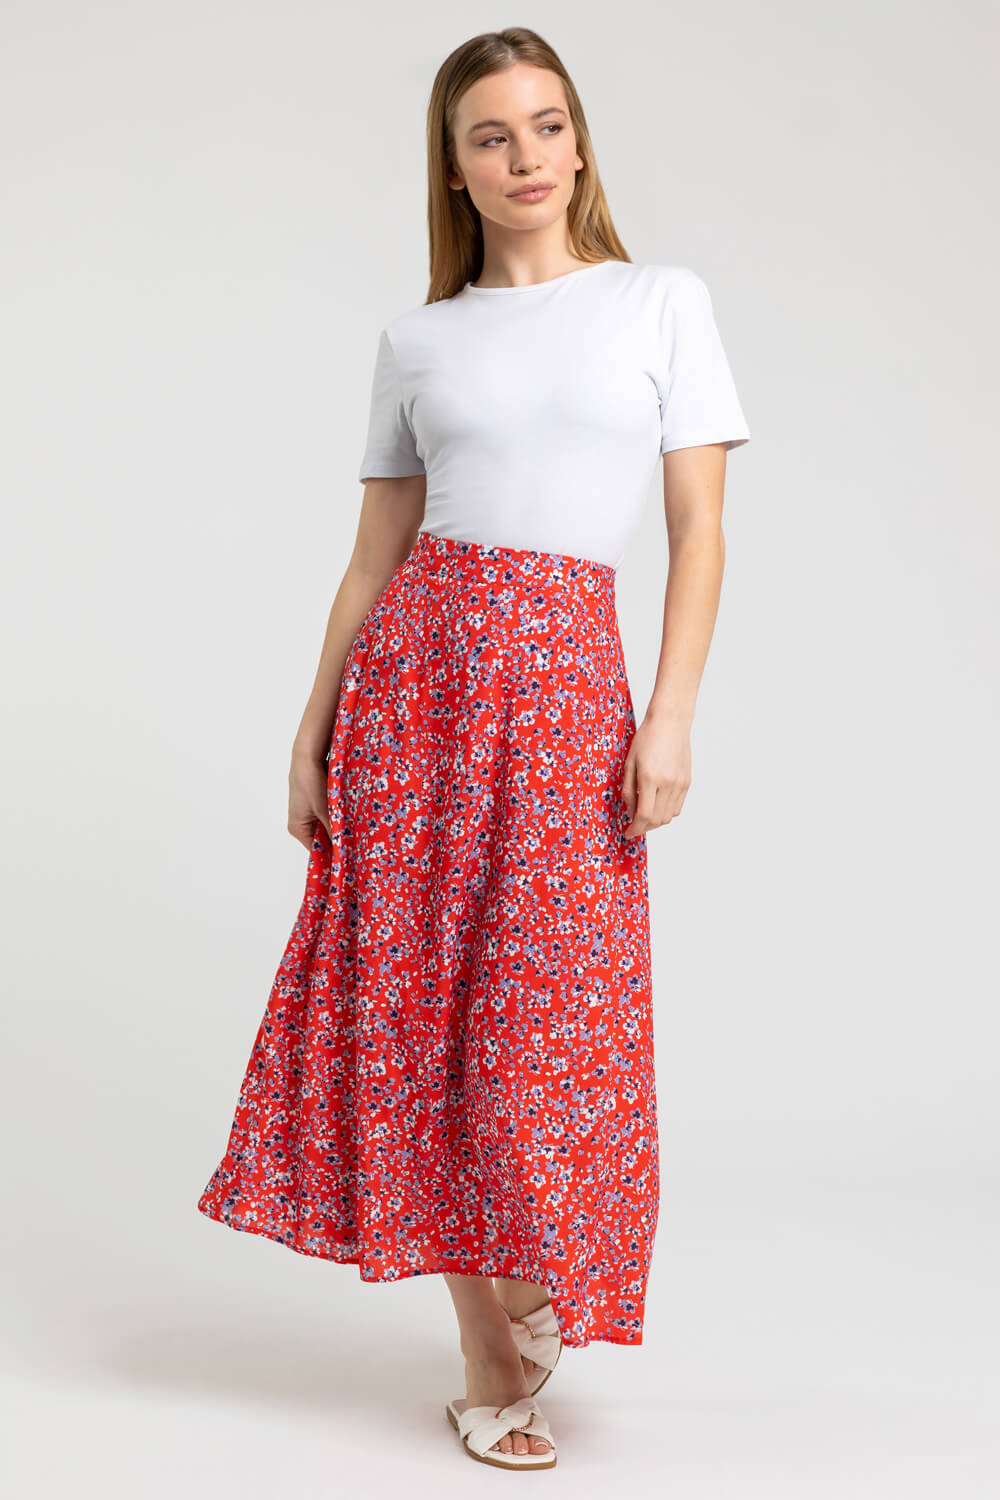 Petite Ditsy Floral A-Line Skirt in Red | Roman UK